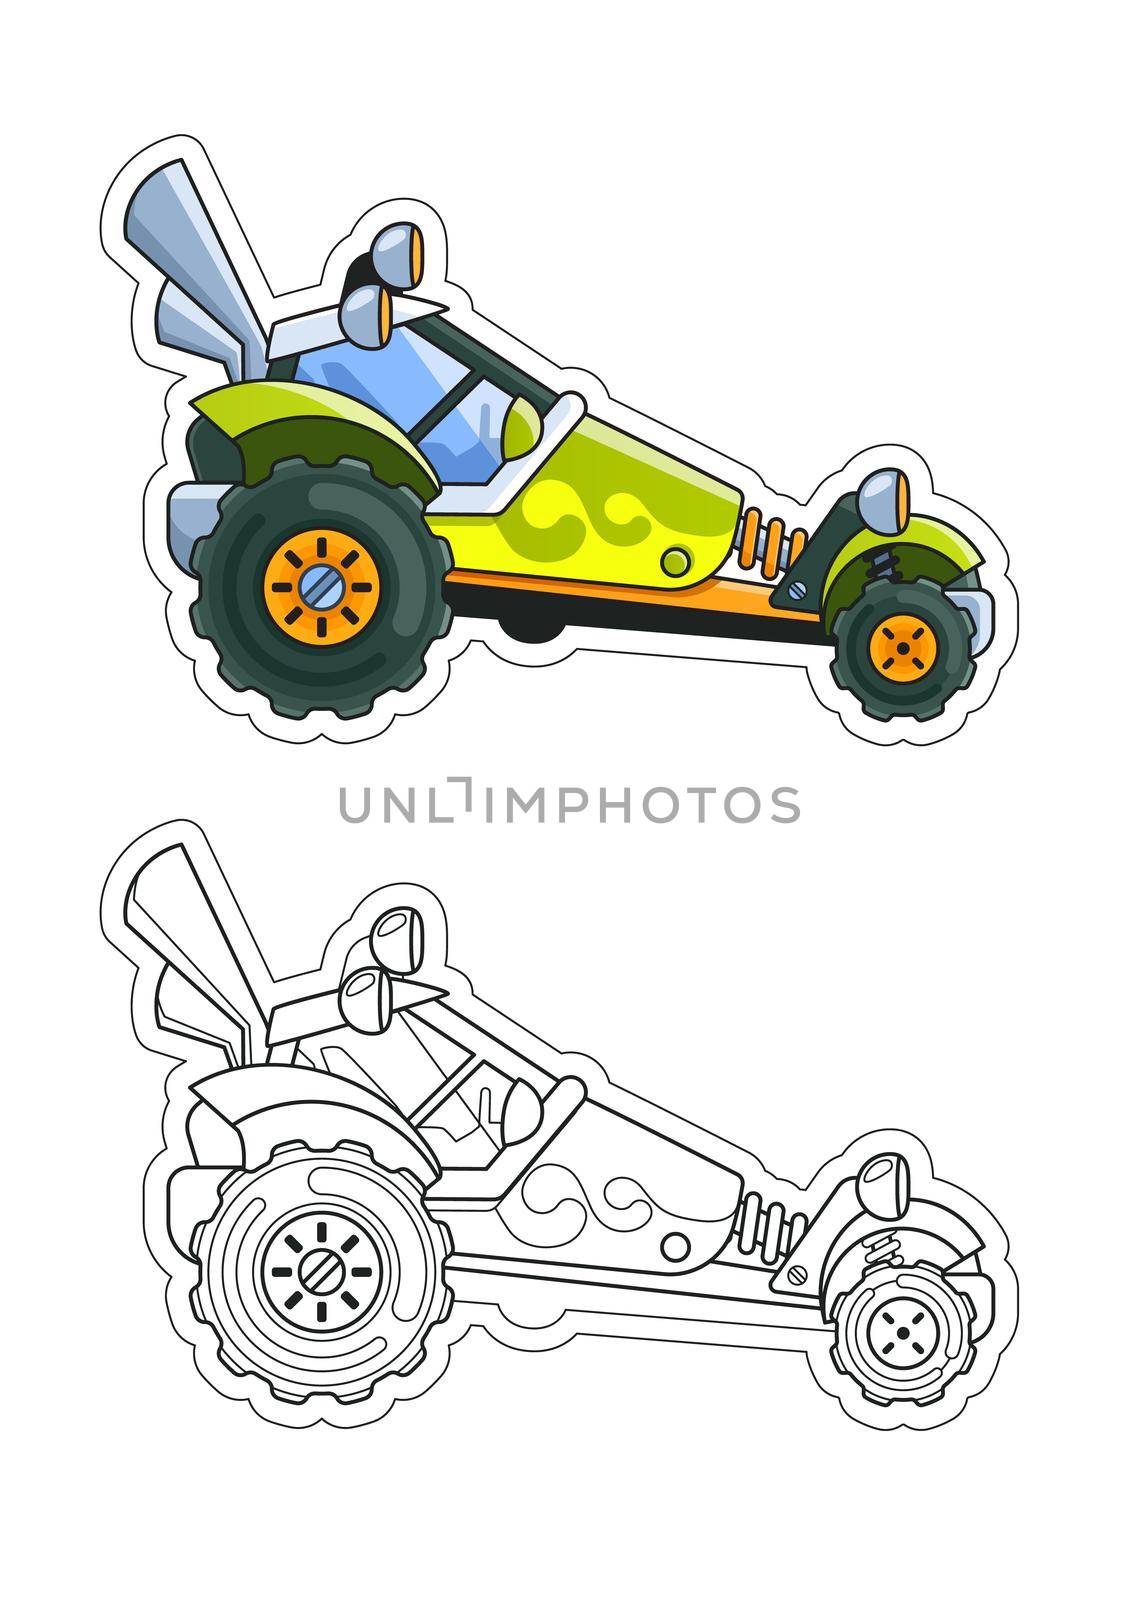 Green Buggy Side View Coloring Book. Colored Version and Line Art.